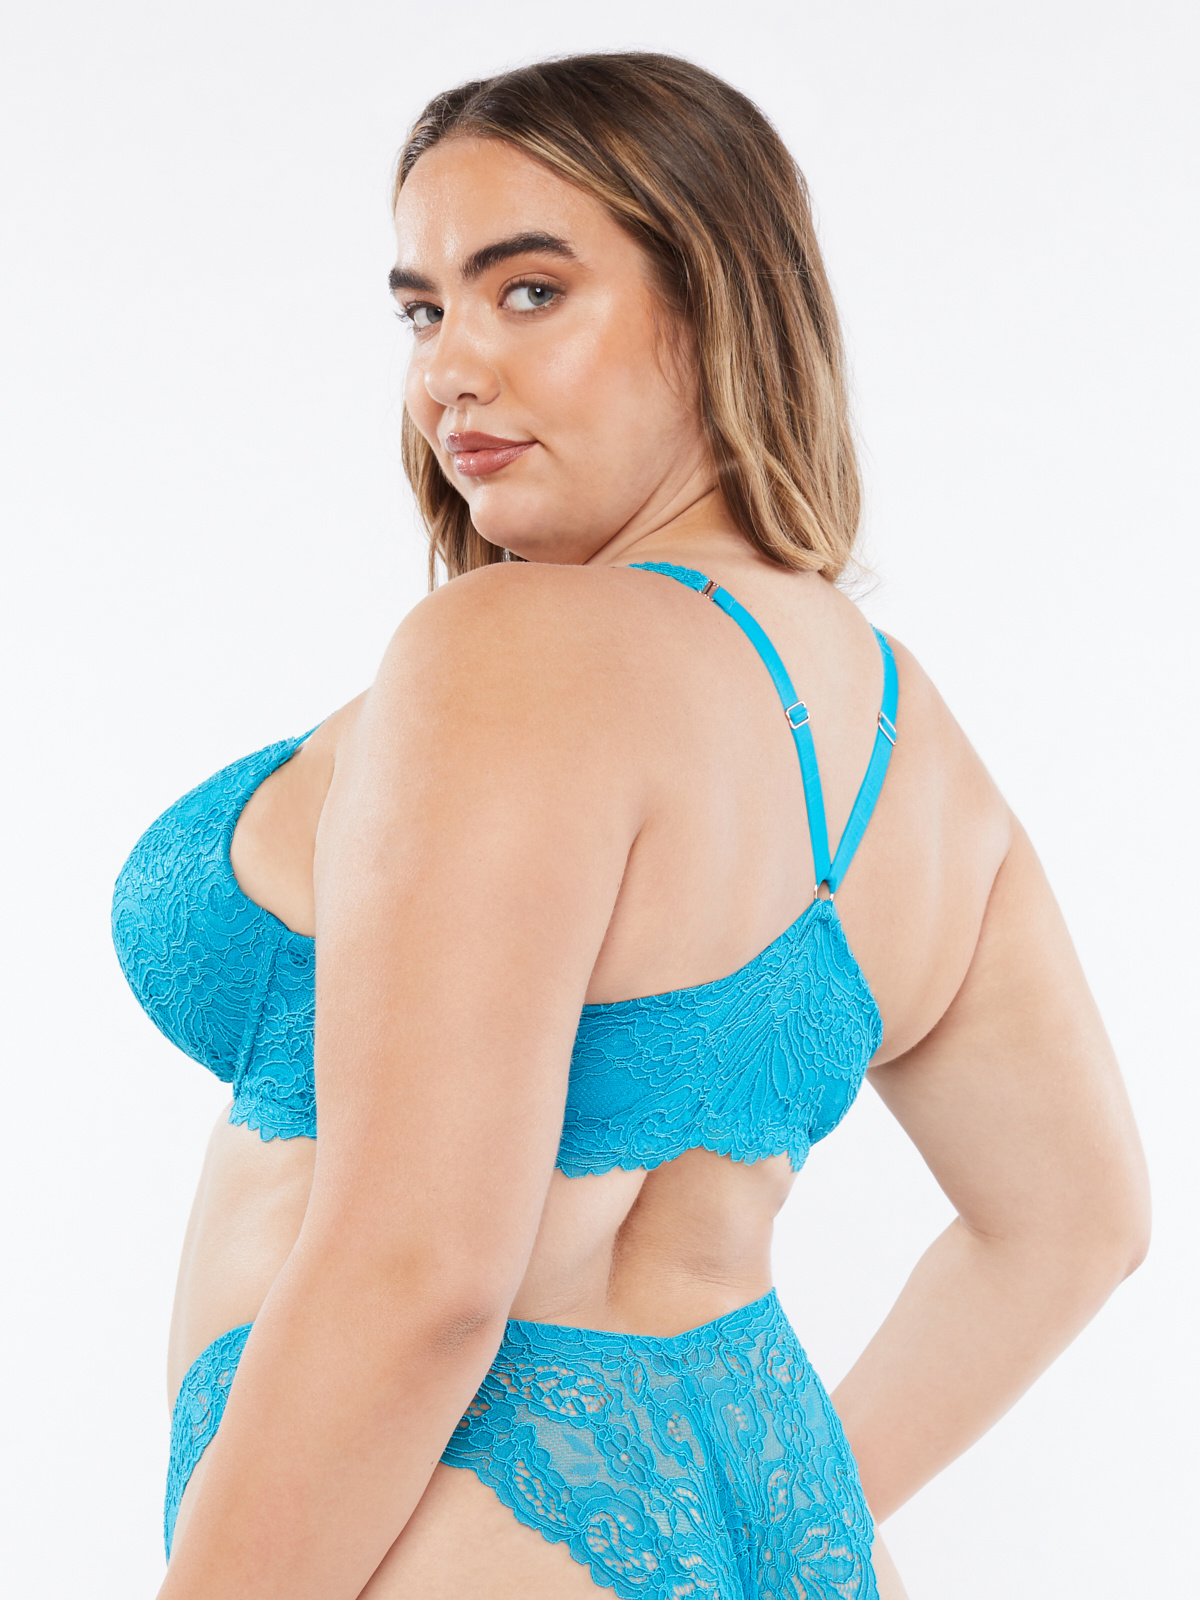 MELENECA Front Fastening Bras for Women Plus Size Underwire Unlined Lace  Cup Cushion Strap Blue 48C - ShopStyle